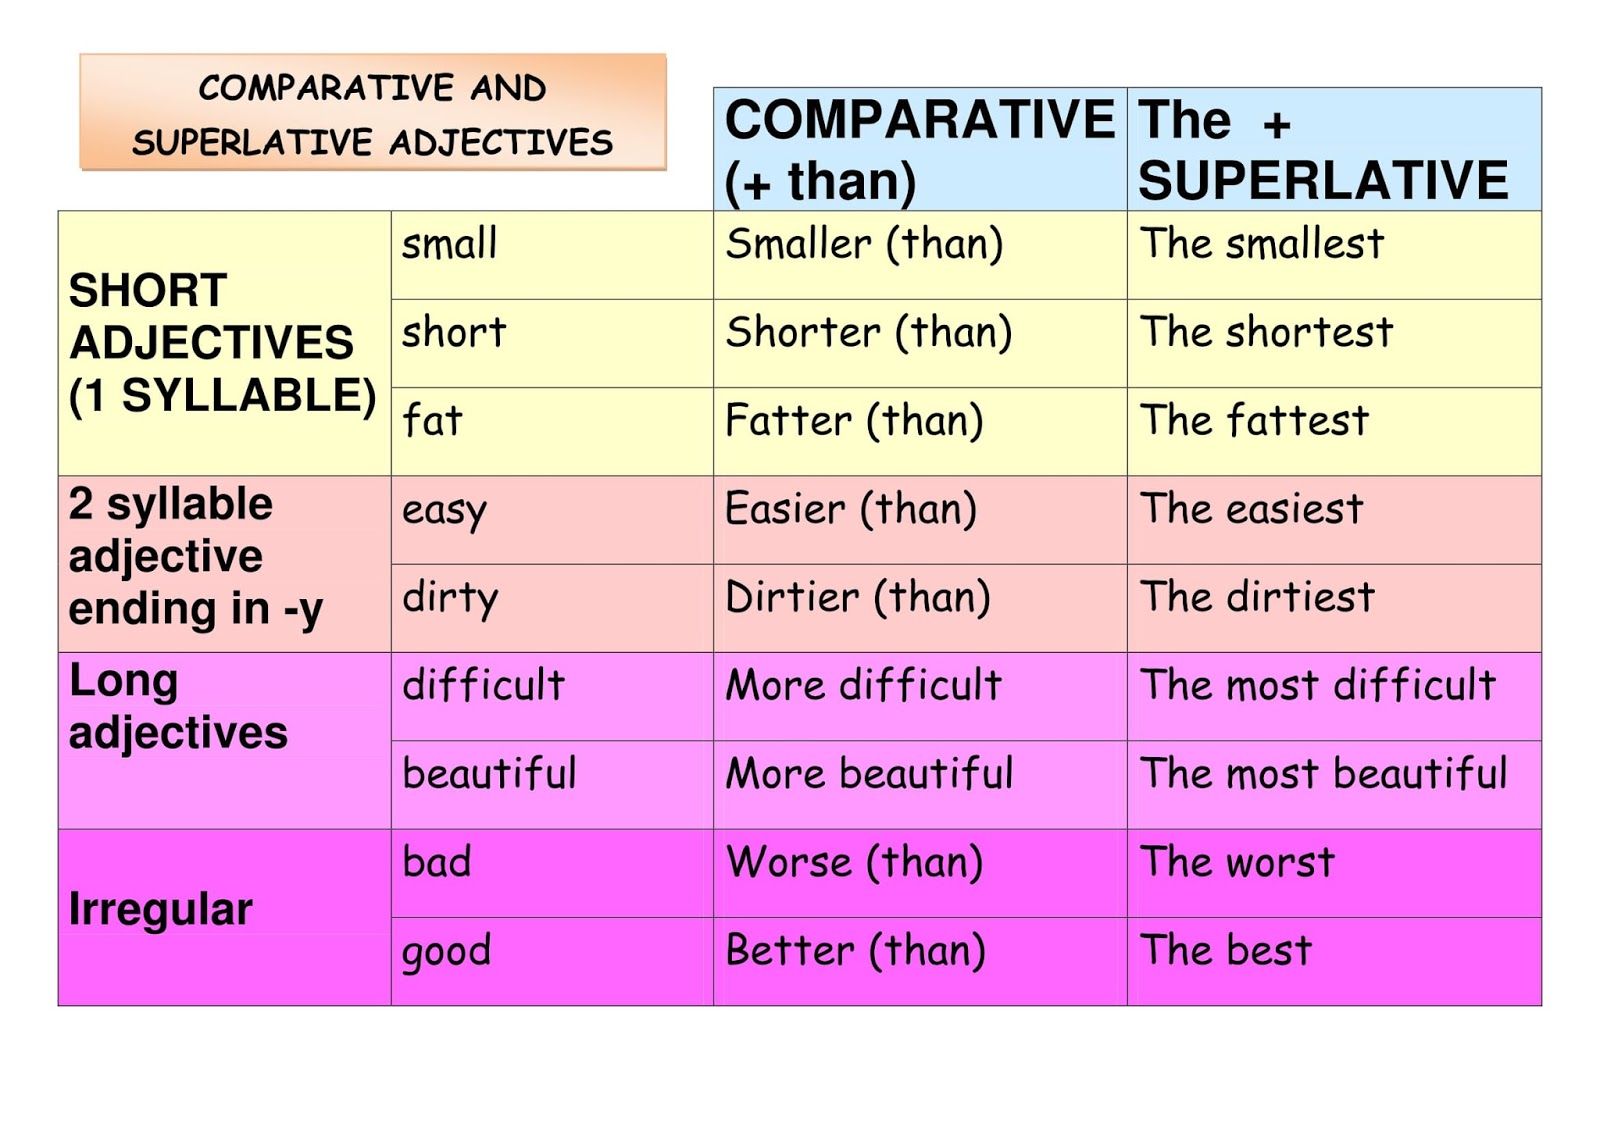 Dirty adjectives. Superlative adjectives правило. Таблица Comparative and Superlative. Comparative and Superlative forms of adjectives. Comparative and Superlative adjectives правило.